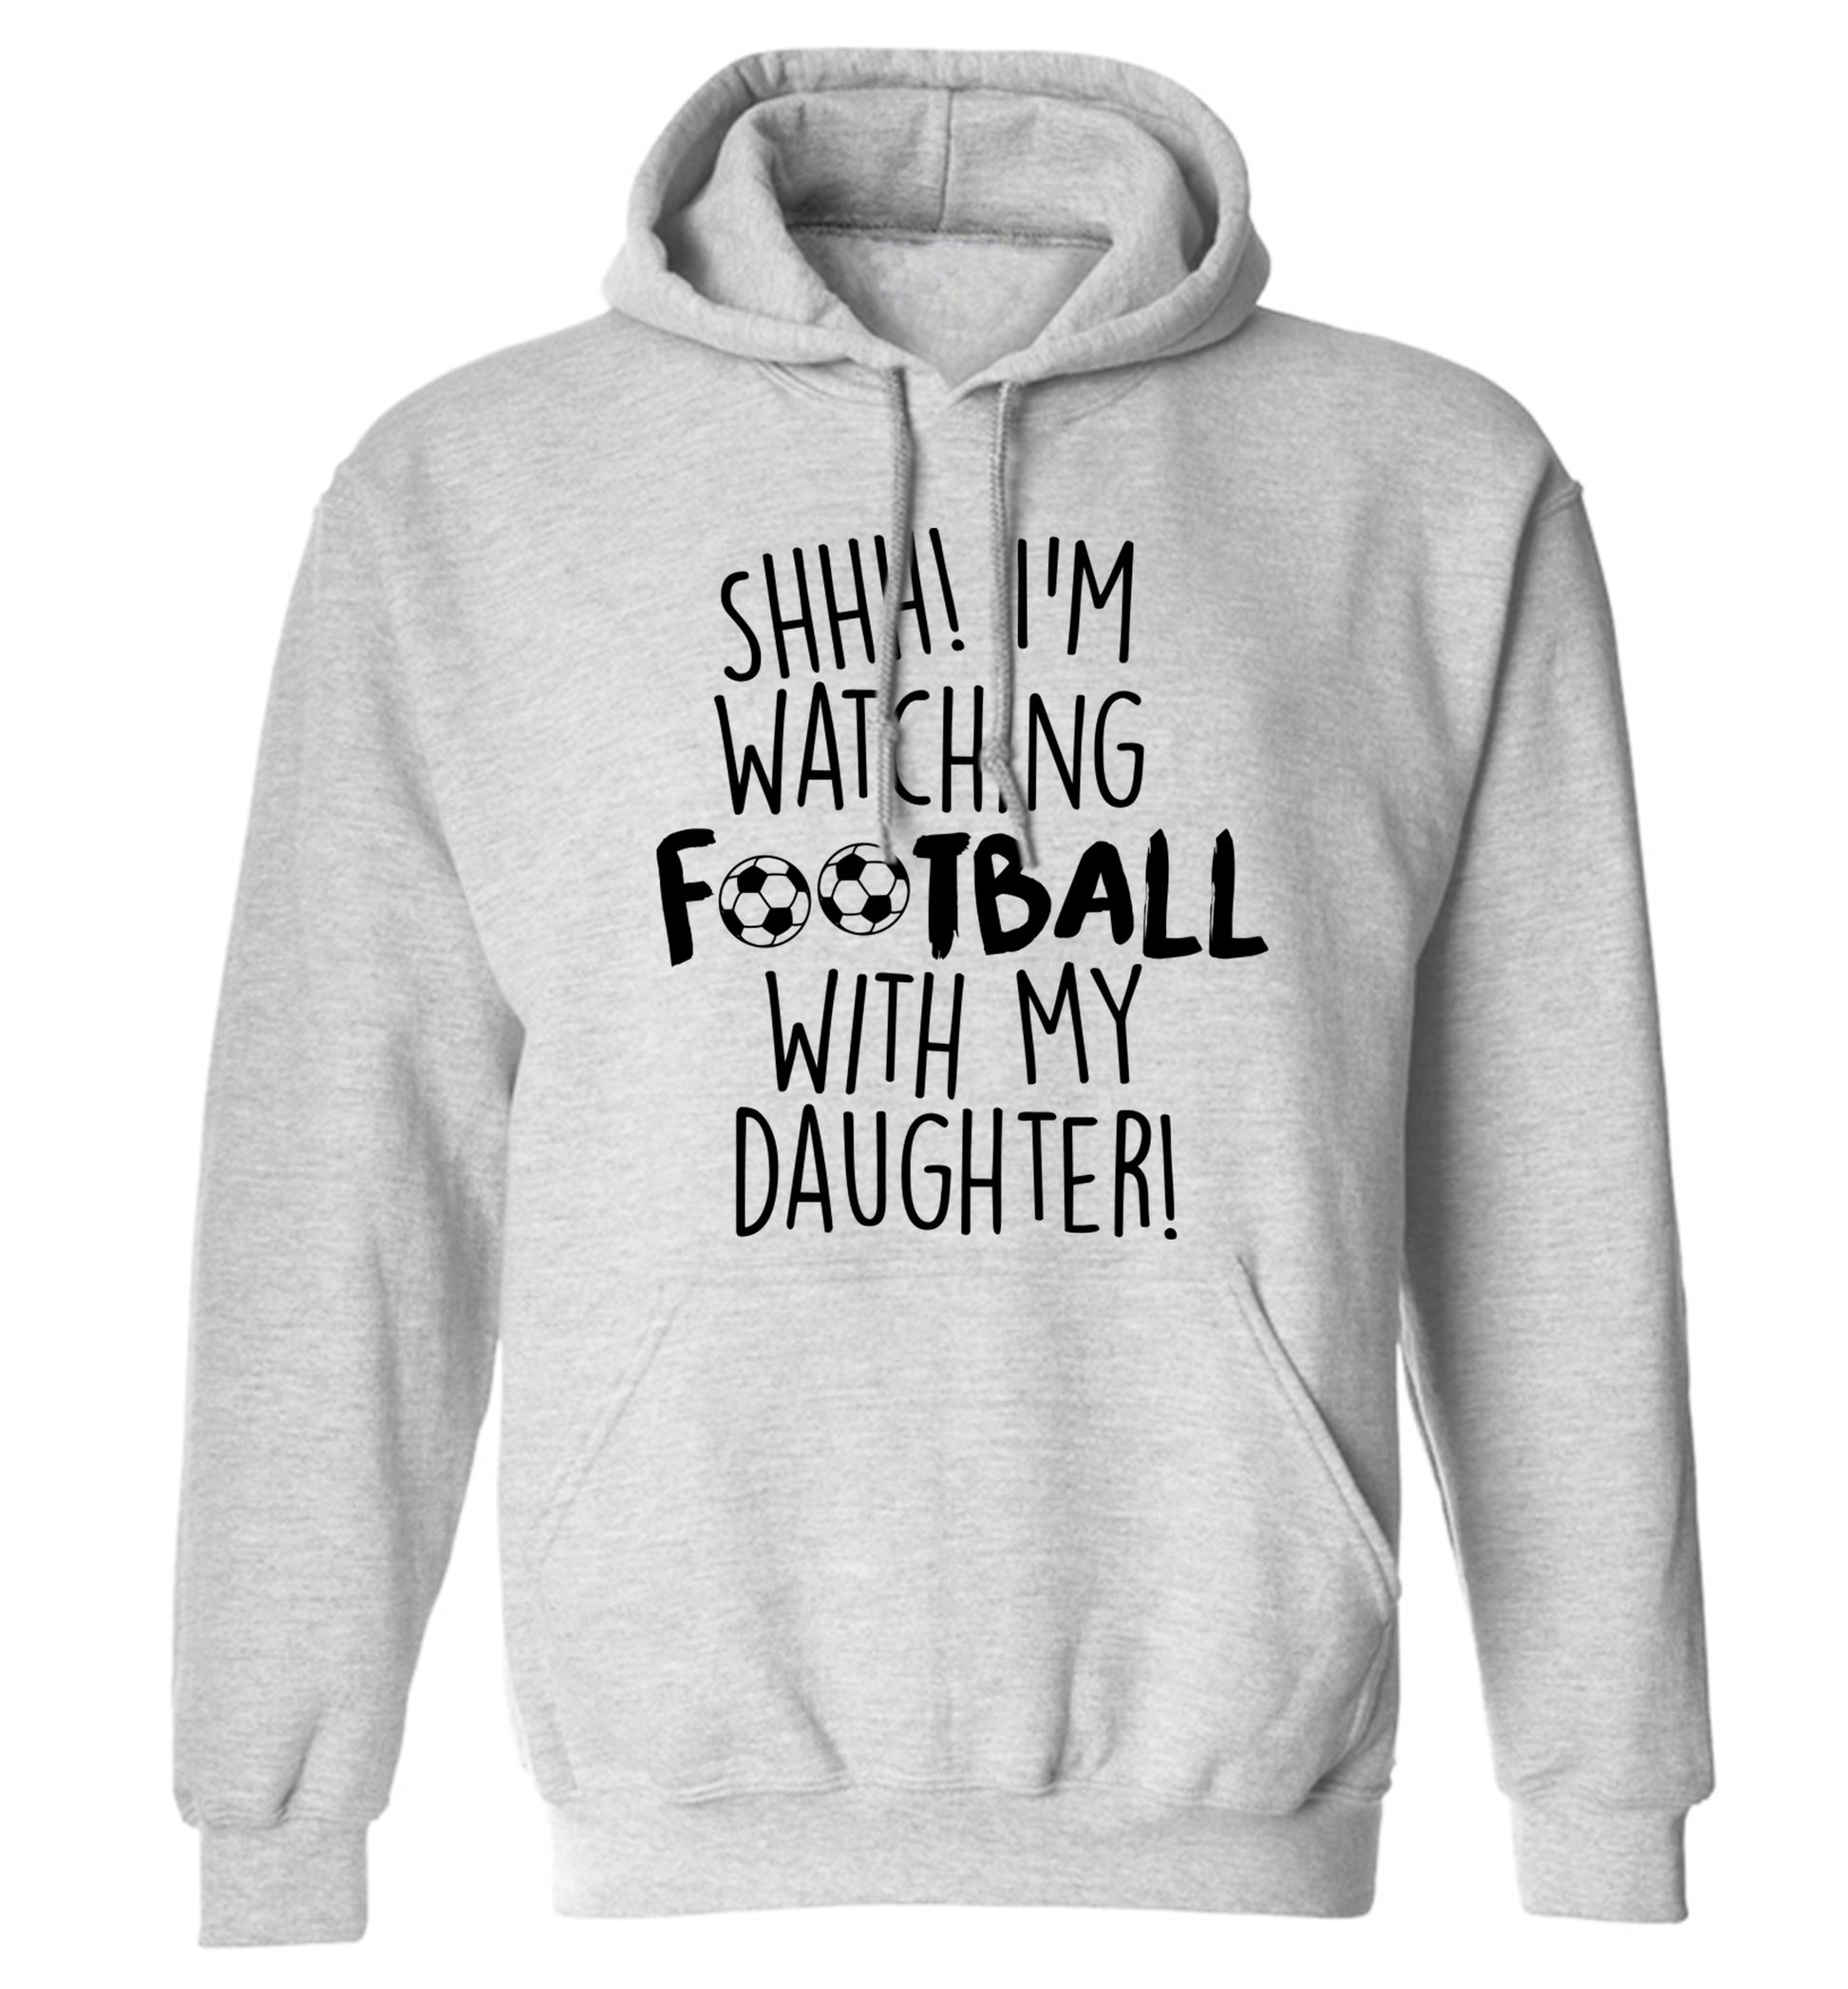 Shhh I'm watching football with my daughter adults unisexgrey hoodie 2XL